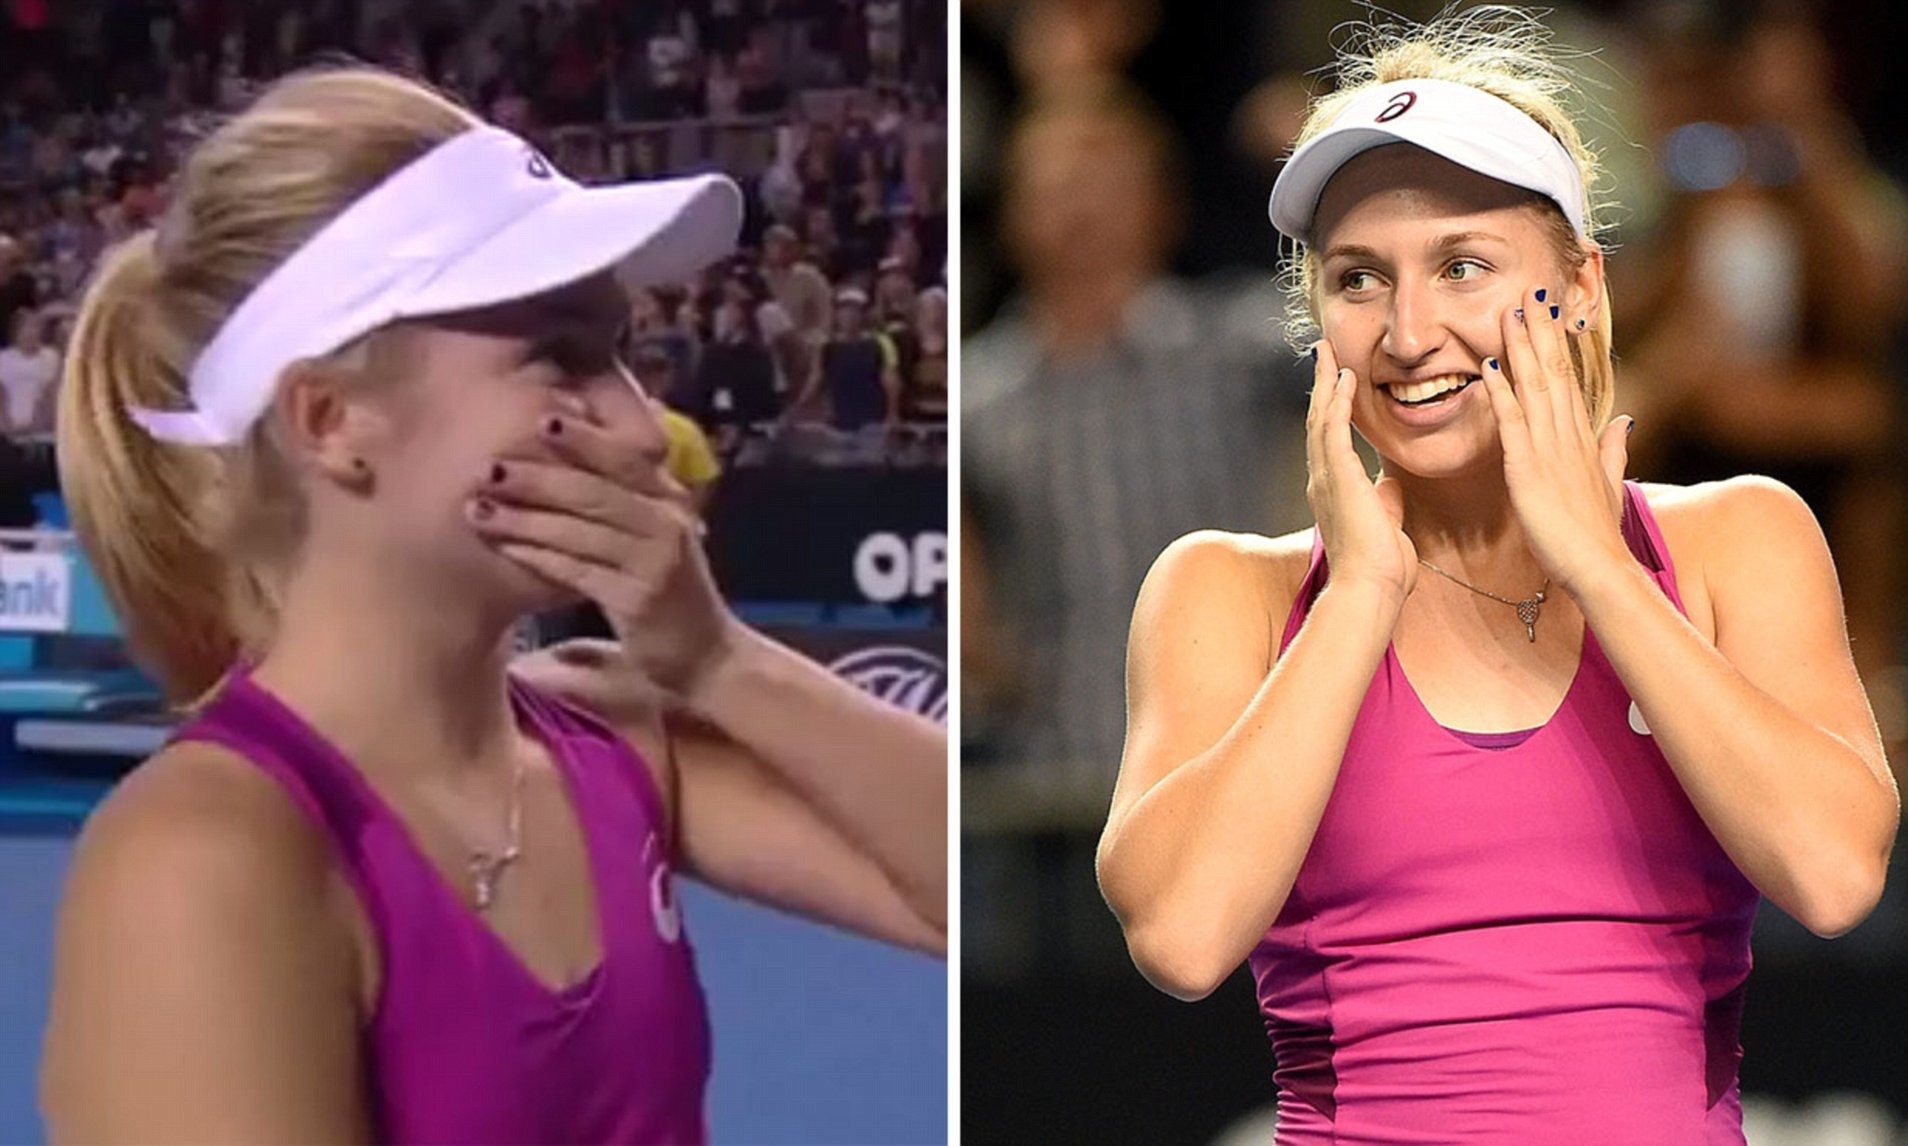 In 2016, during a post-match interview on 7 News after her Australian Open comeback win, tennis player Daria Gavrilova unintentionally made a humorous slip of the tongue, saying, "I am good from behind," sparking laughter from the crowd.